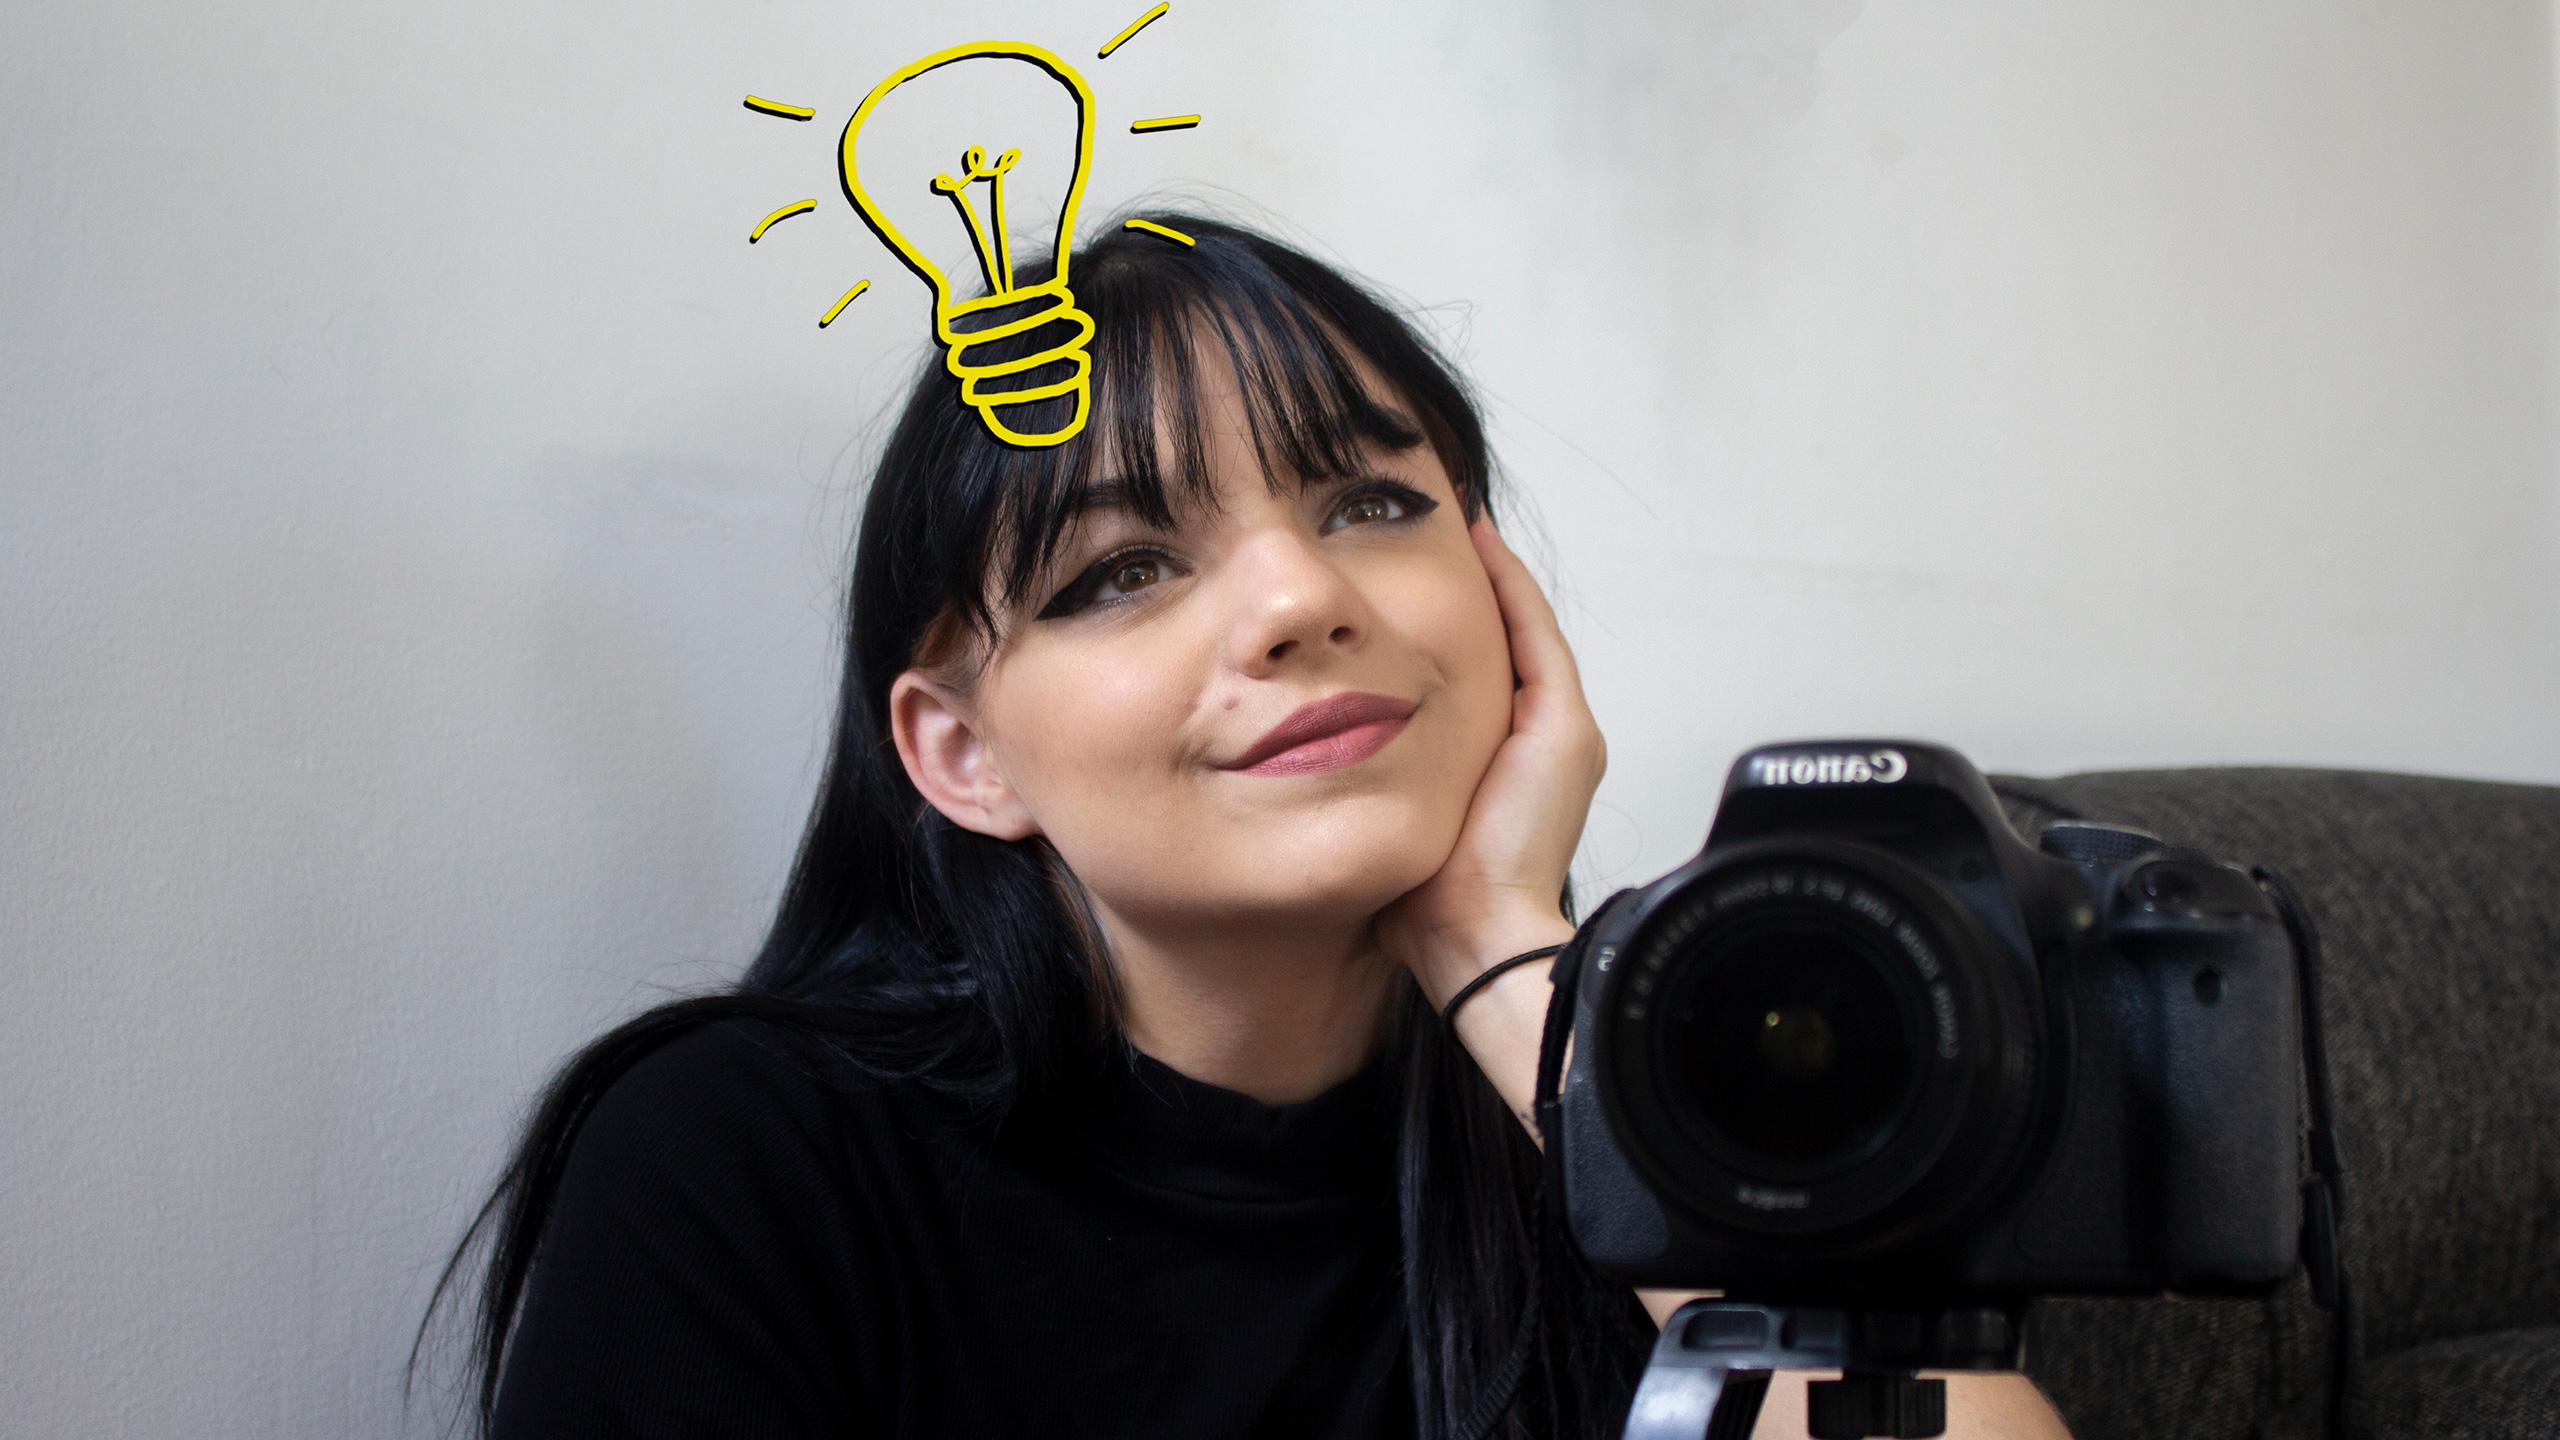 Mirror selfie of a photography student with a lightbulb illustration above her head.